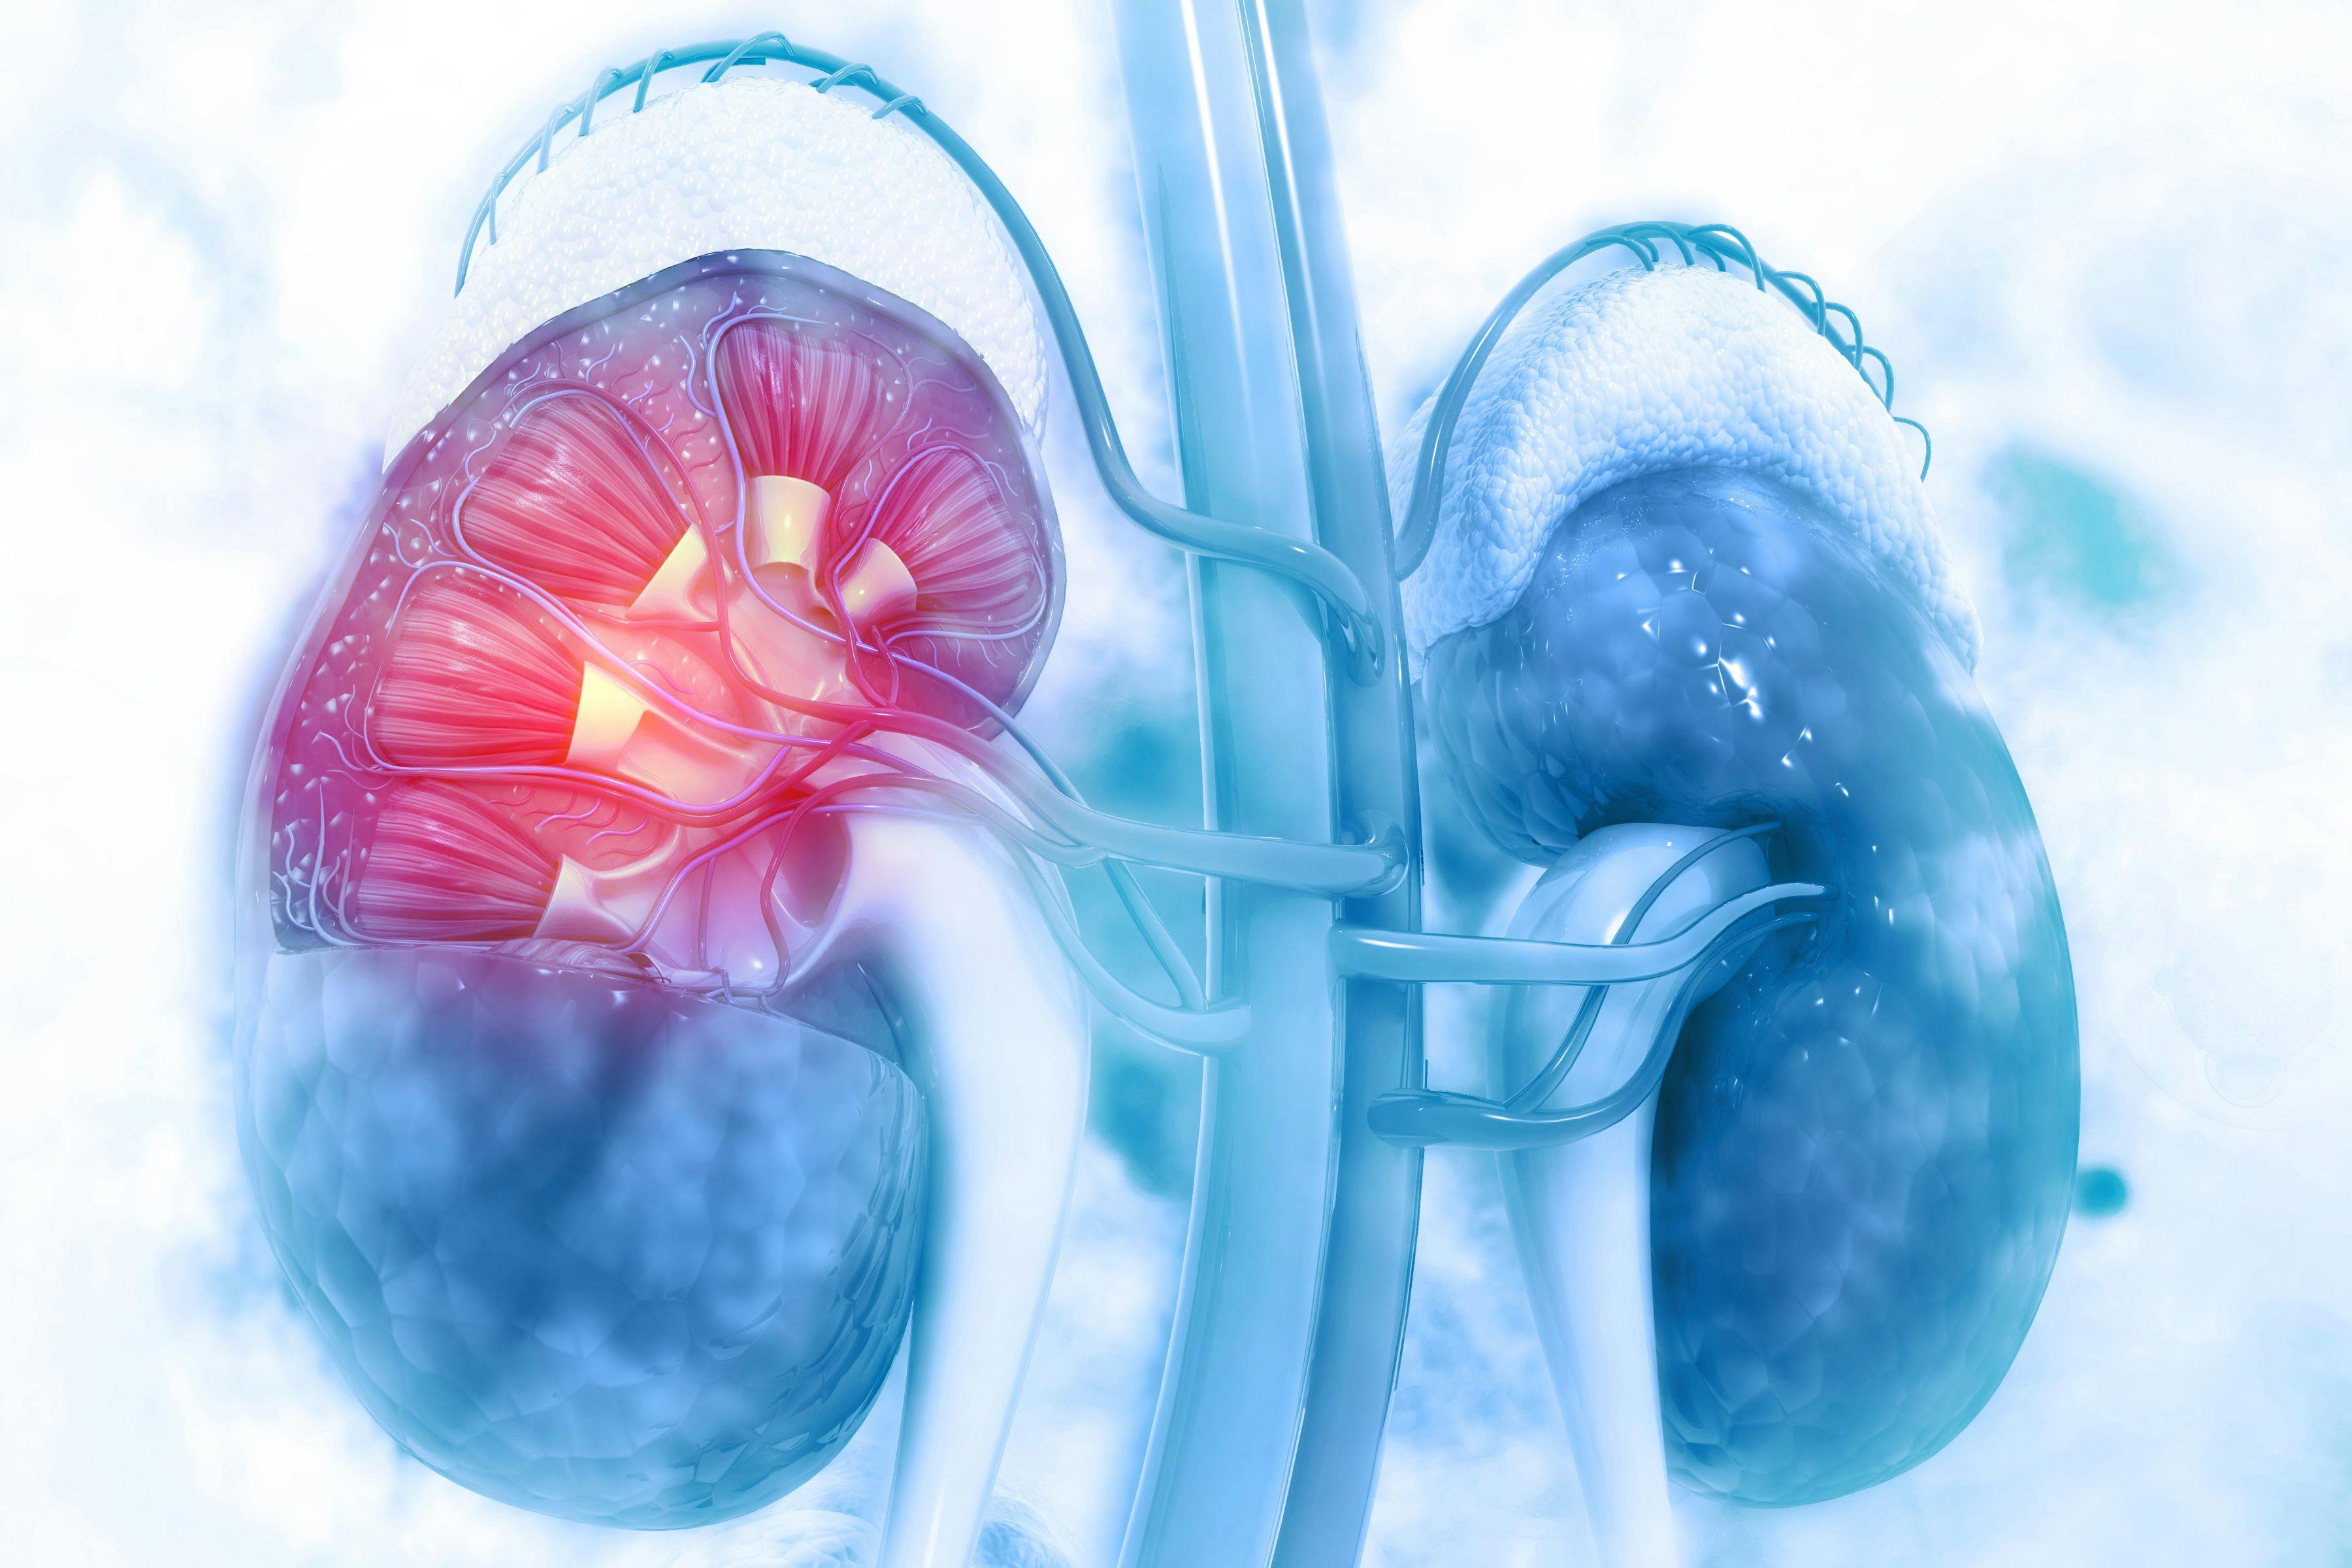 Advanced Kidney Disease May Get Overlooked in Individuals With CP